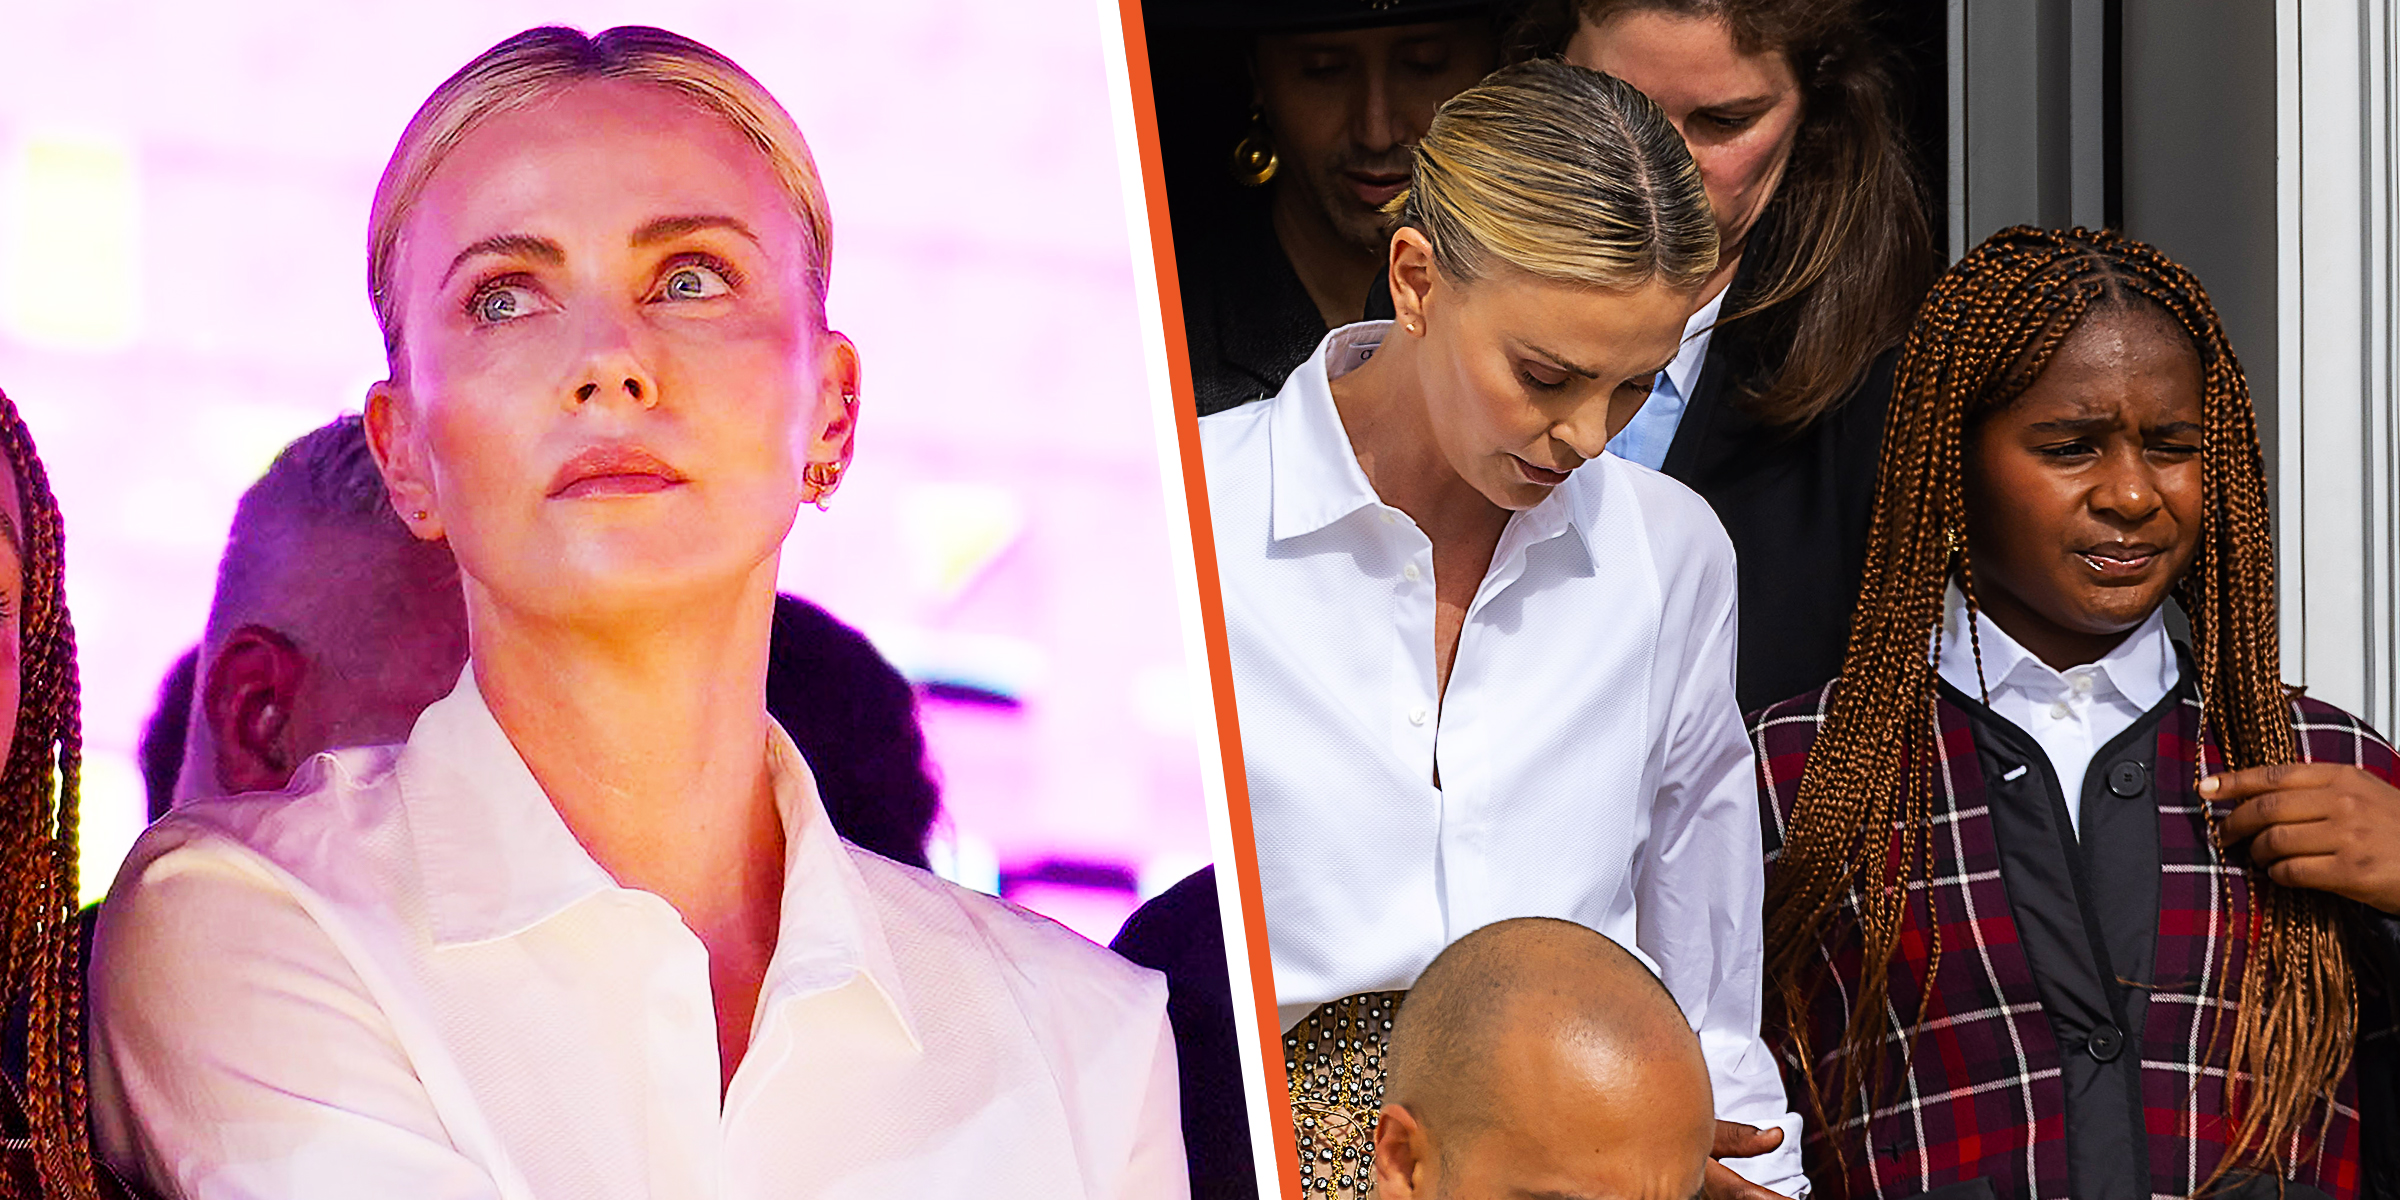 ‘She Forgot Half the Dress’: Single Mom Charlize Theron Shamed for Outfit During Event With Daughter